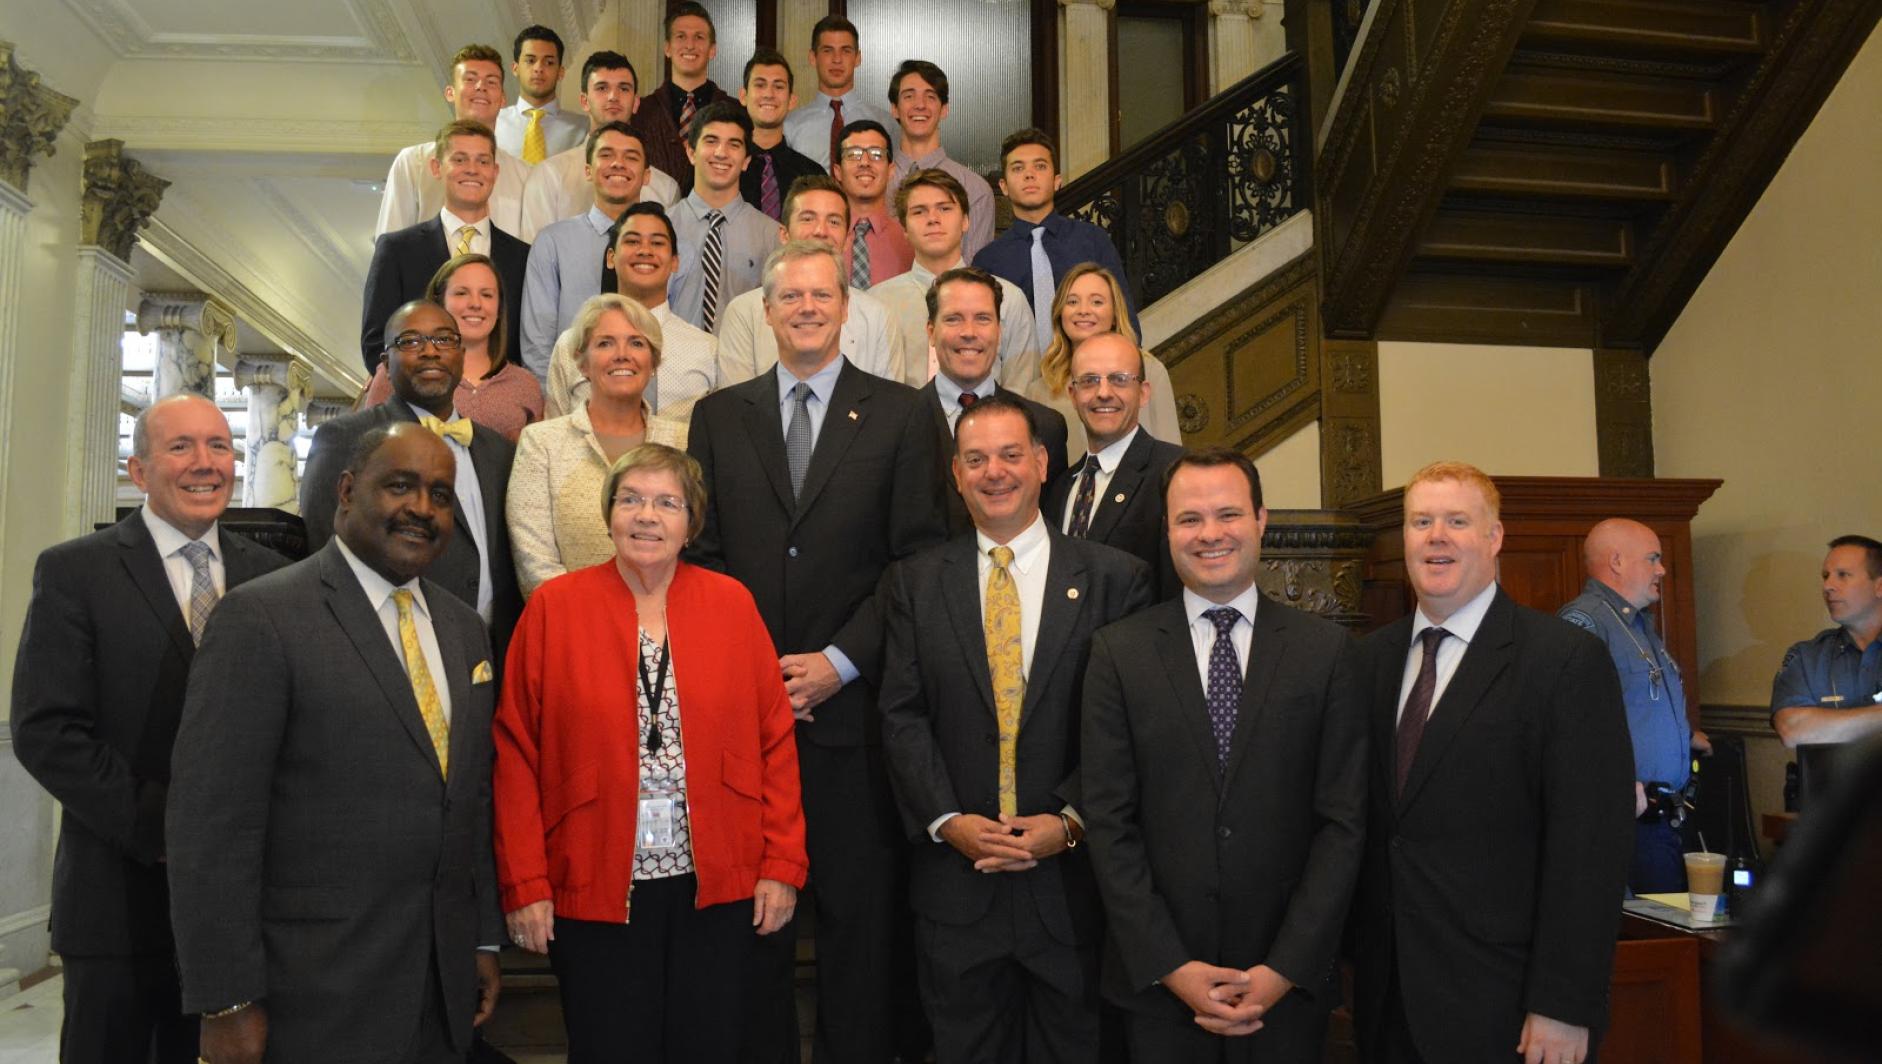 Men's Volleyball team with Governor Baker in 2017